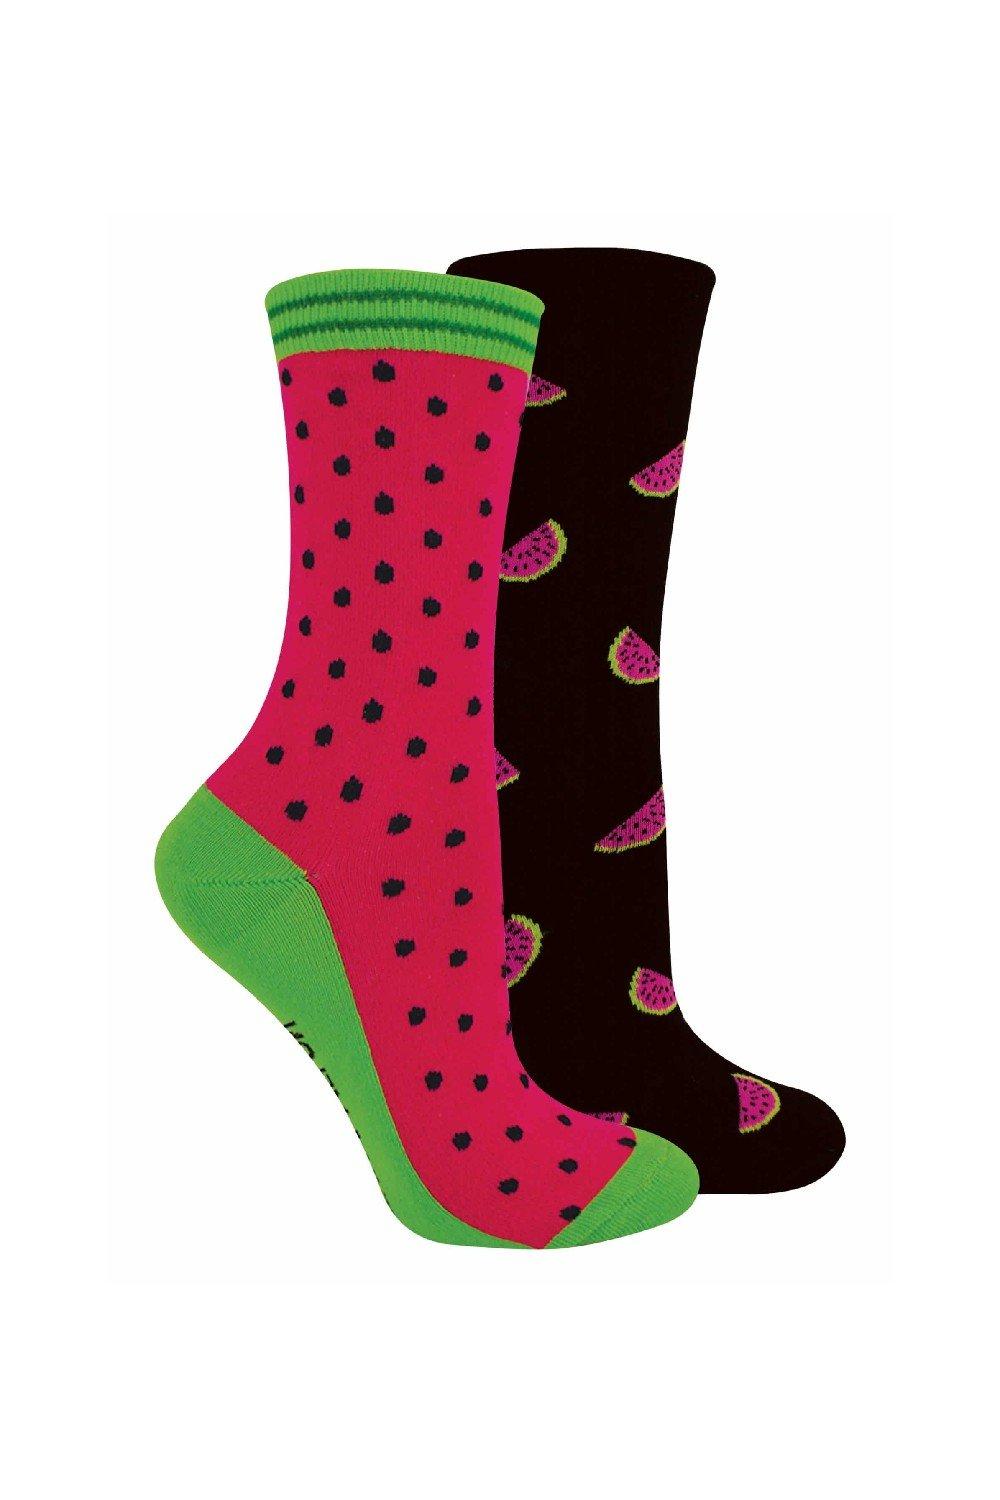 2 Pairs Novelty Soft Cotton Melon Fruit Socks in a Gift Box